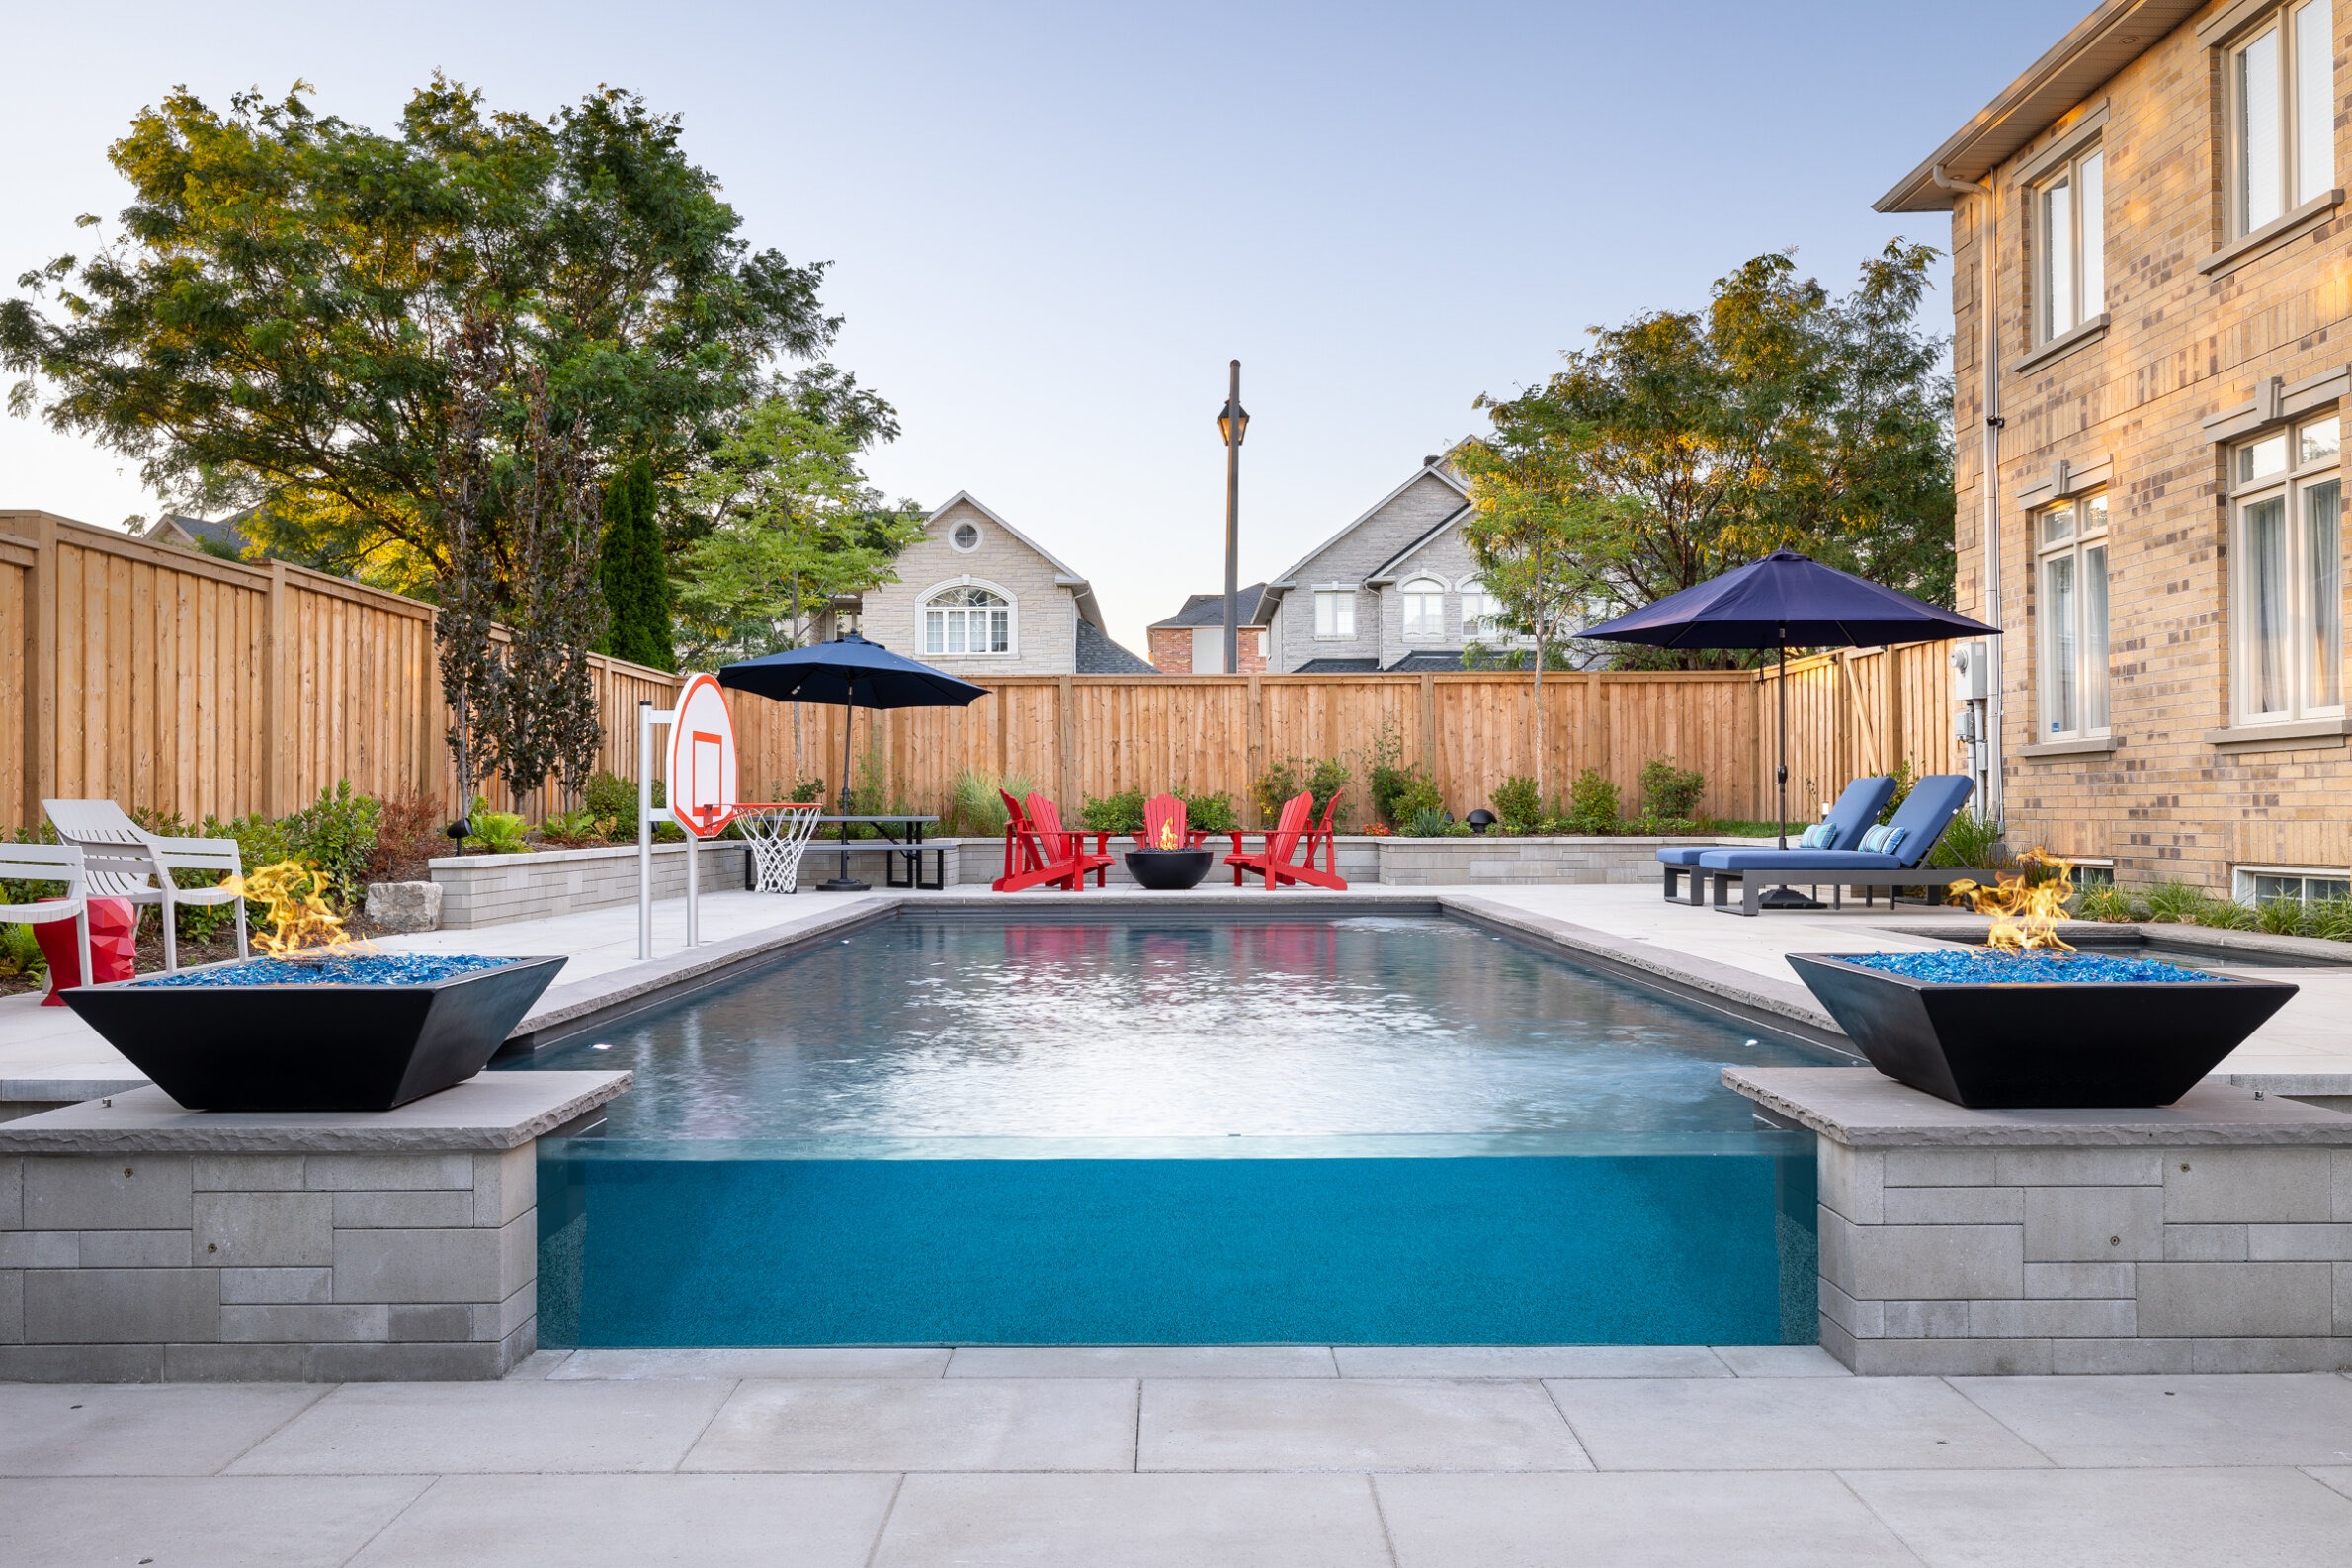 A backyard setting with an inground pool, surrounded by patio chairs, umbrellas, a basketball hoop, and a fire feature, with a wooden fence backdrop.